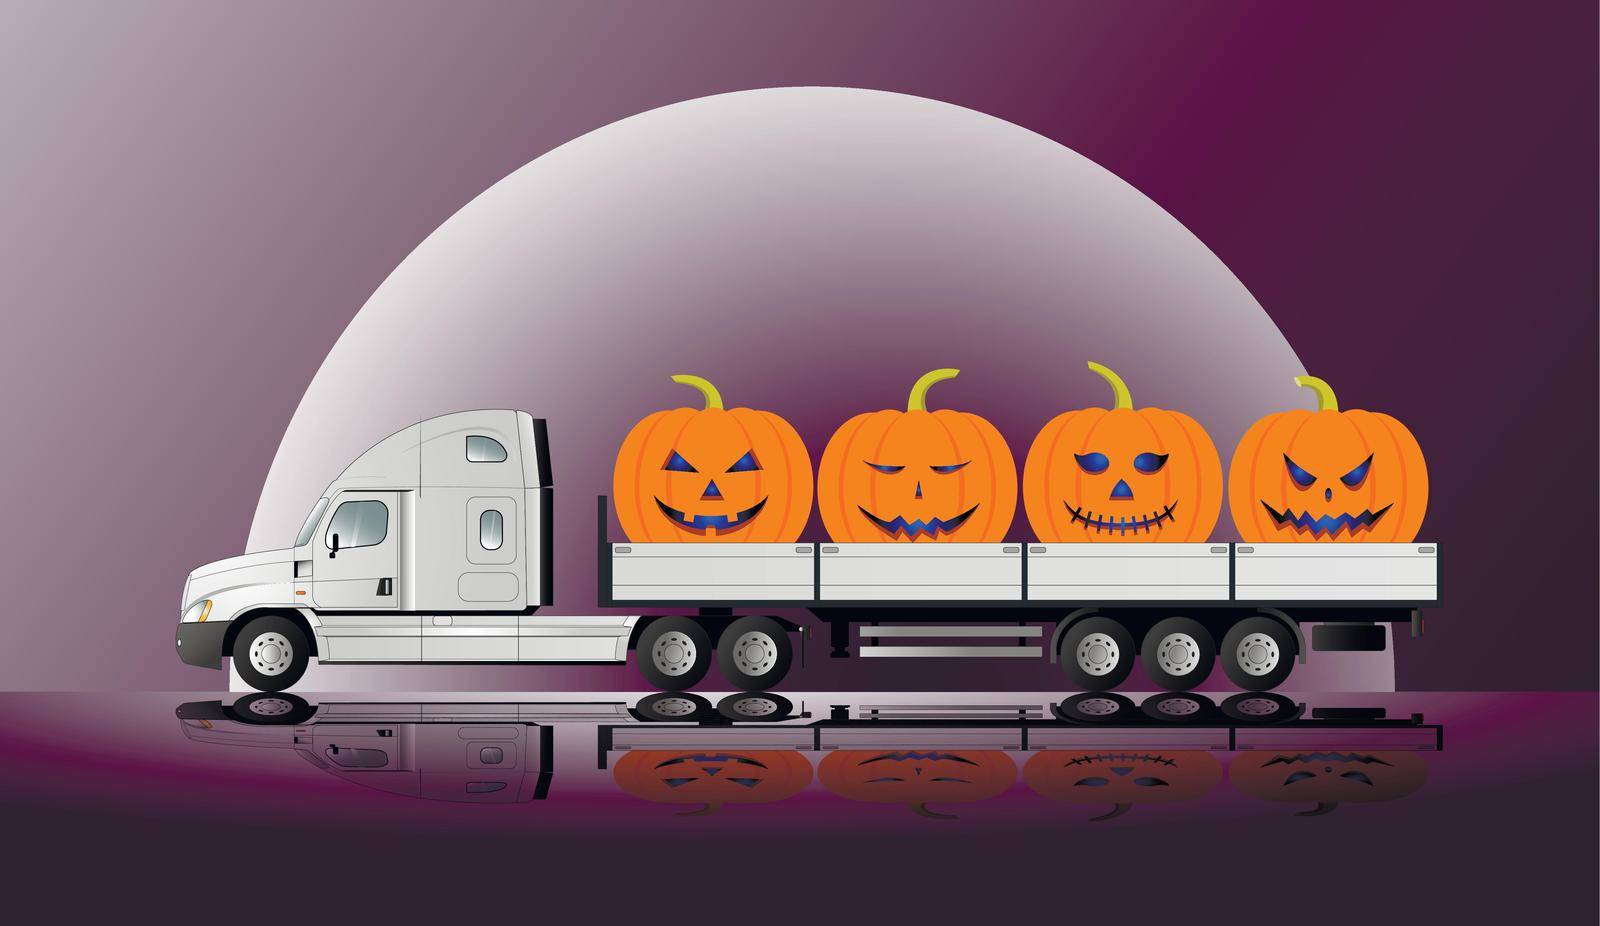 A modern American road train transporting Halloween pumpkins against the backdrop of a full moon. by AliaksaB